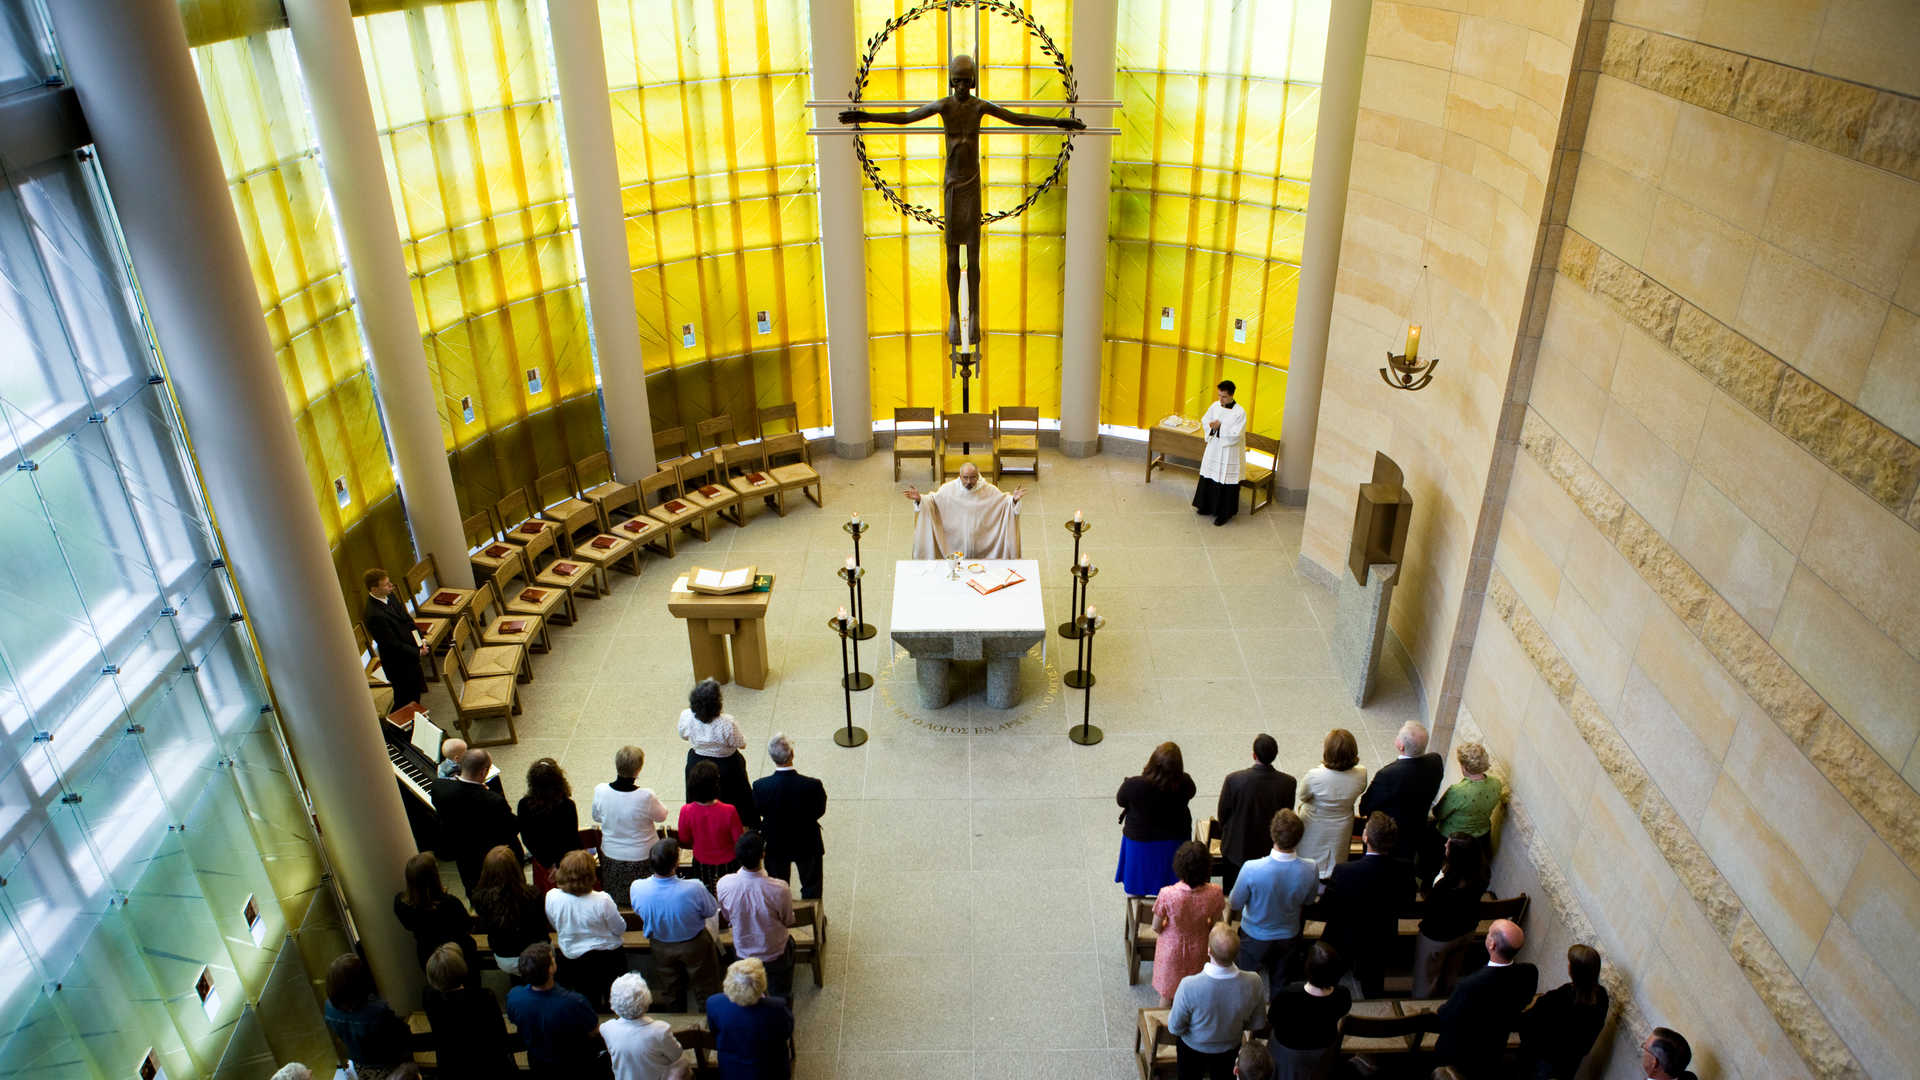 Father Reginald Whitt conducts a commencement mass in the St. Thomas More chapel